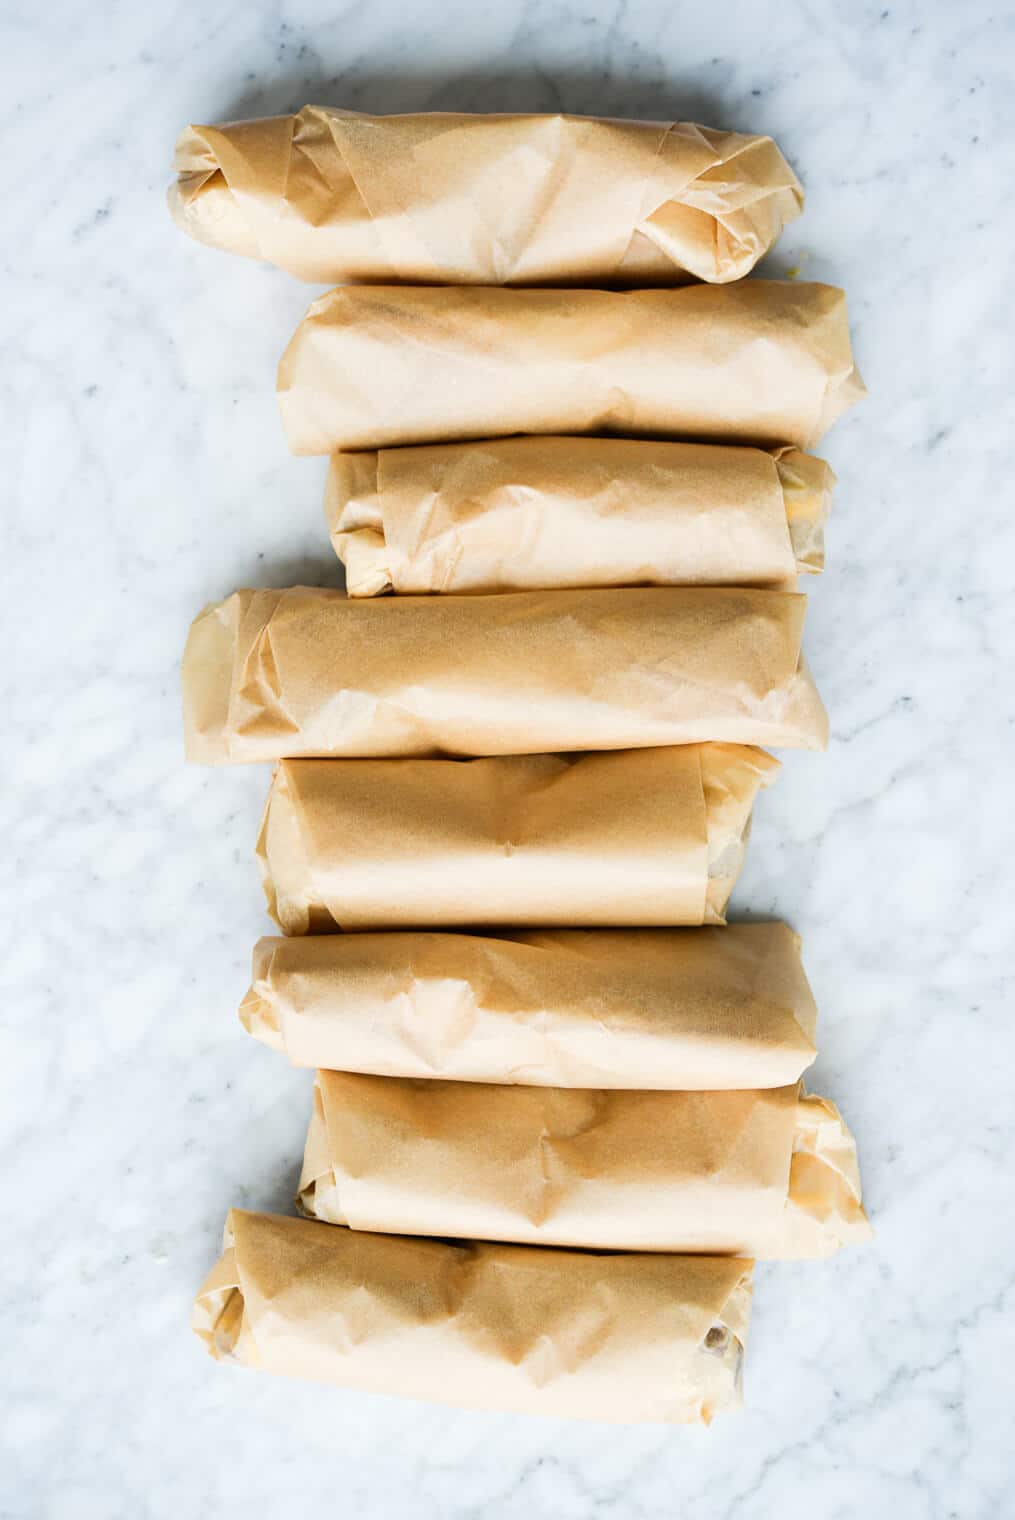 8 breakfast burritos rolled in parchment paper laying on a marble surface